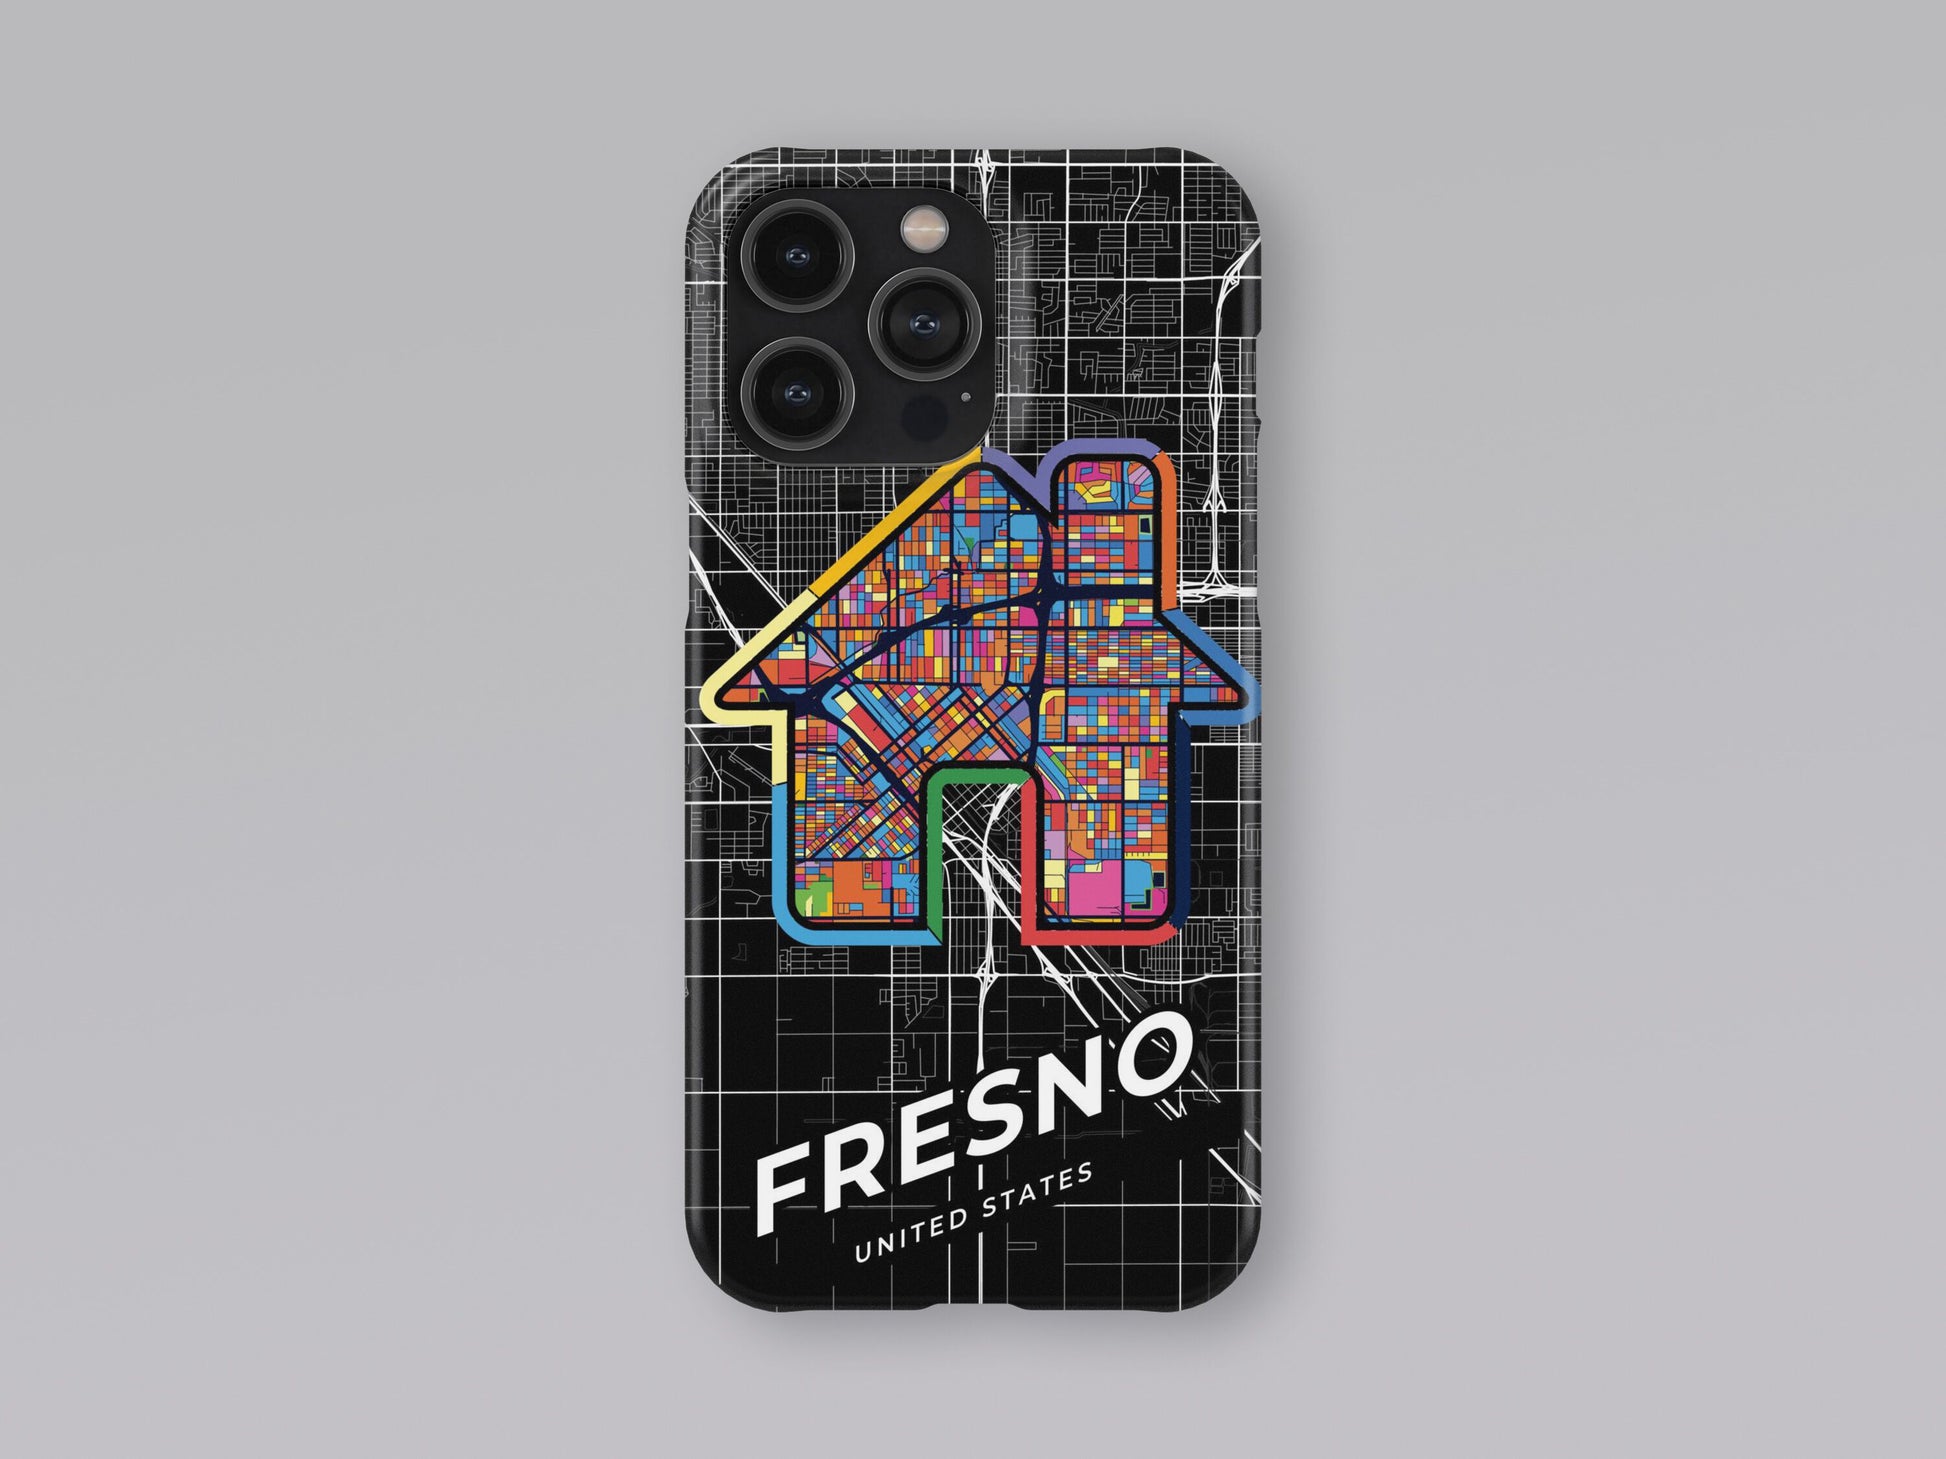 Fresno California slim phone case with colorful icon. Birthday, wedding or housewarming gift. Couple match cases. 3